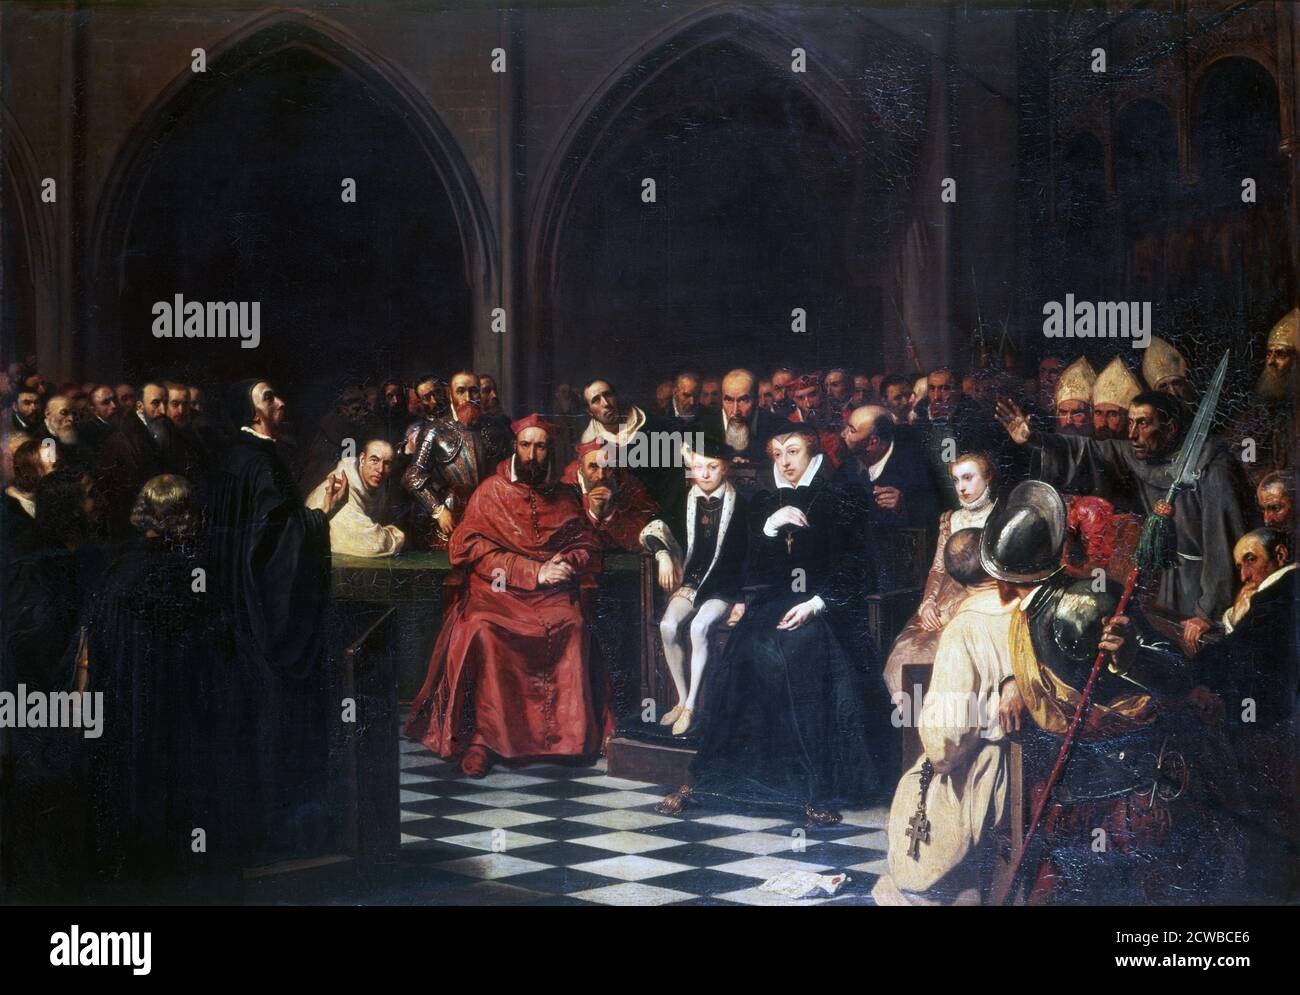 The Colloquy of Poissy in 1561', c1855-1912. By the artist Tony Robert-Fleury. Stock Photo